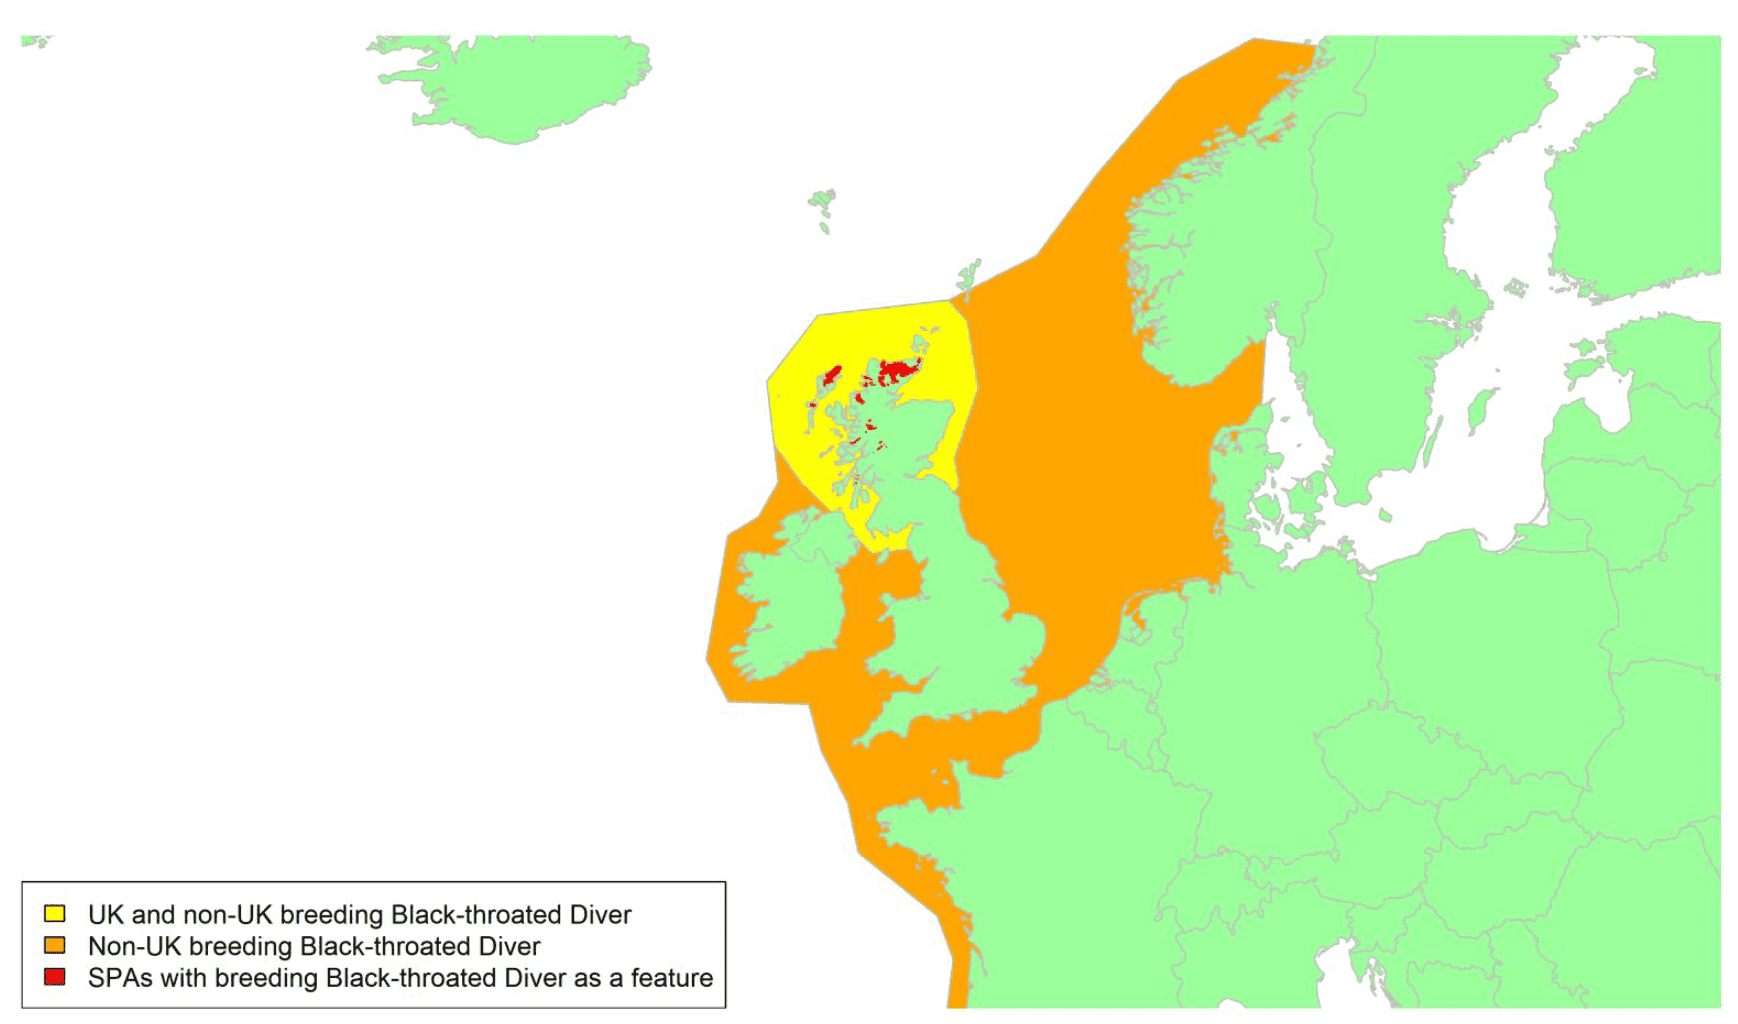 Map of North West Europe showing migratory routes and SPAs within the UK for breeding Black-throated Diver as described in the text below.